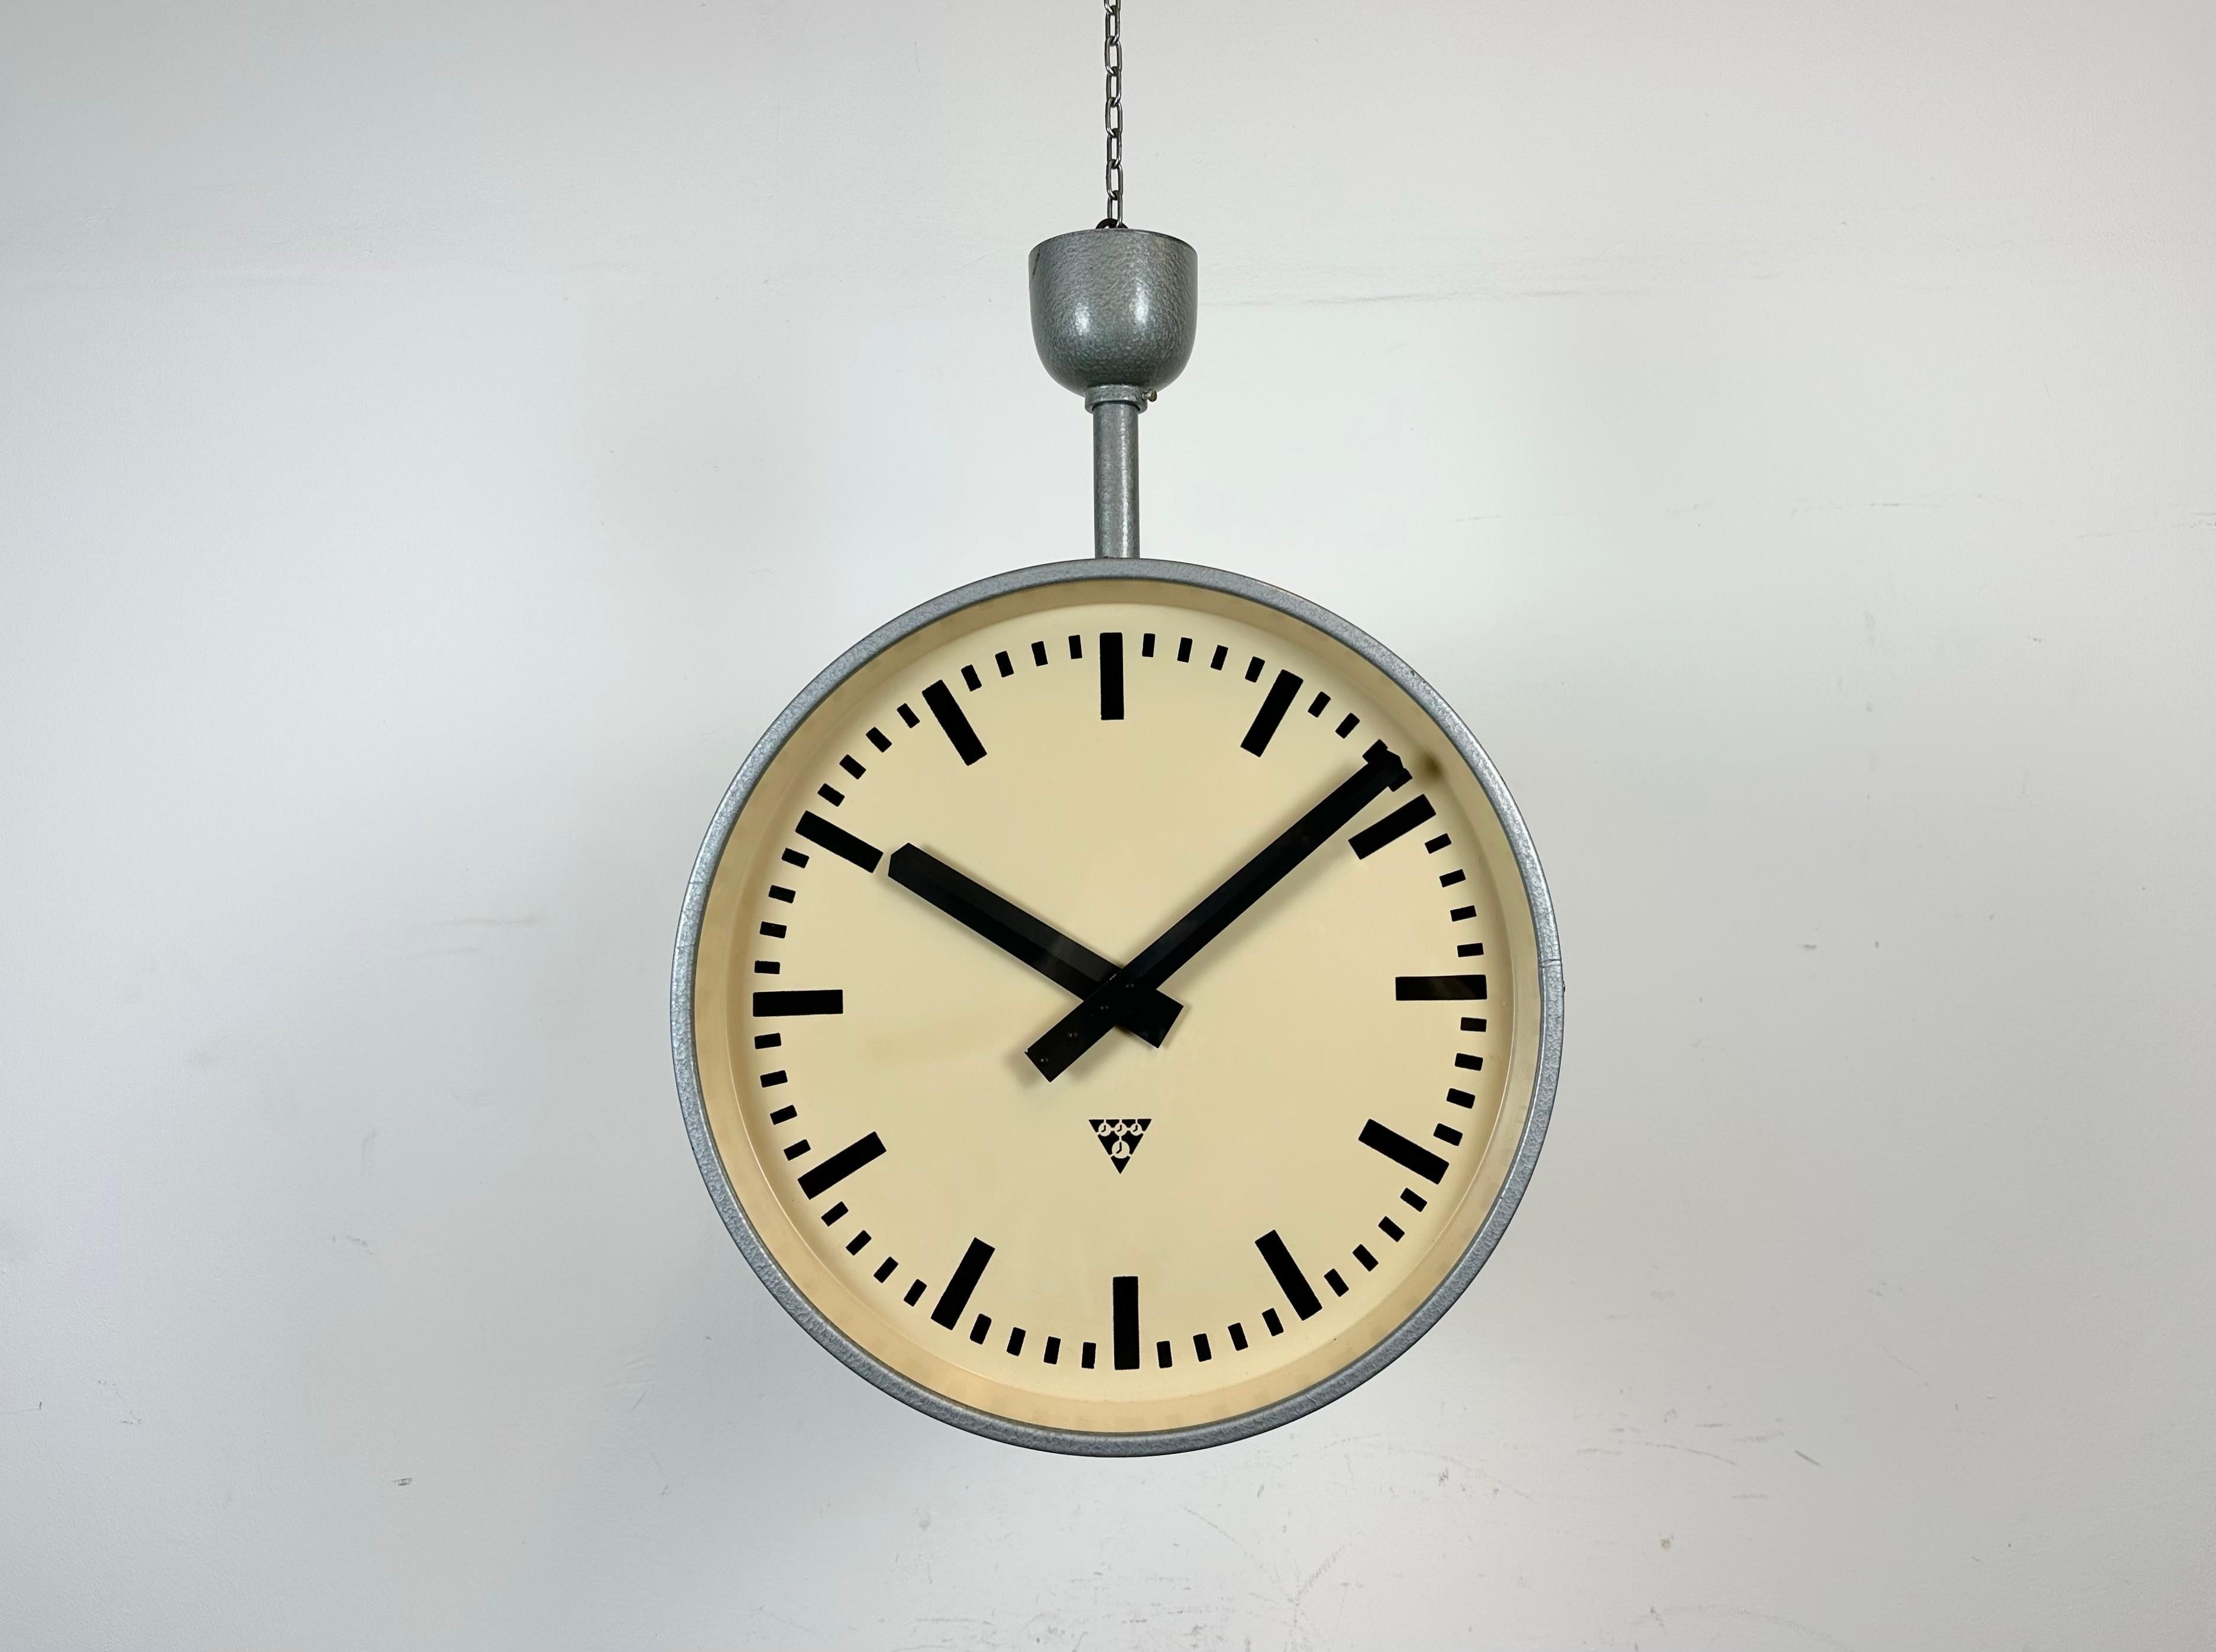 This large double sided railway or factory clock was produced by Pragotron, in former Czechoslovakia, during the 1960s. The piece features a grey hammer paint metal body and a clear glass cover. The clock has been converted into a battery-powered